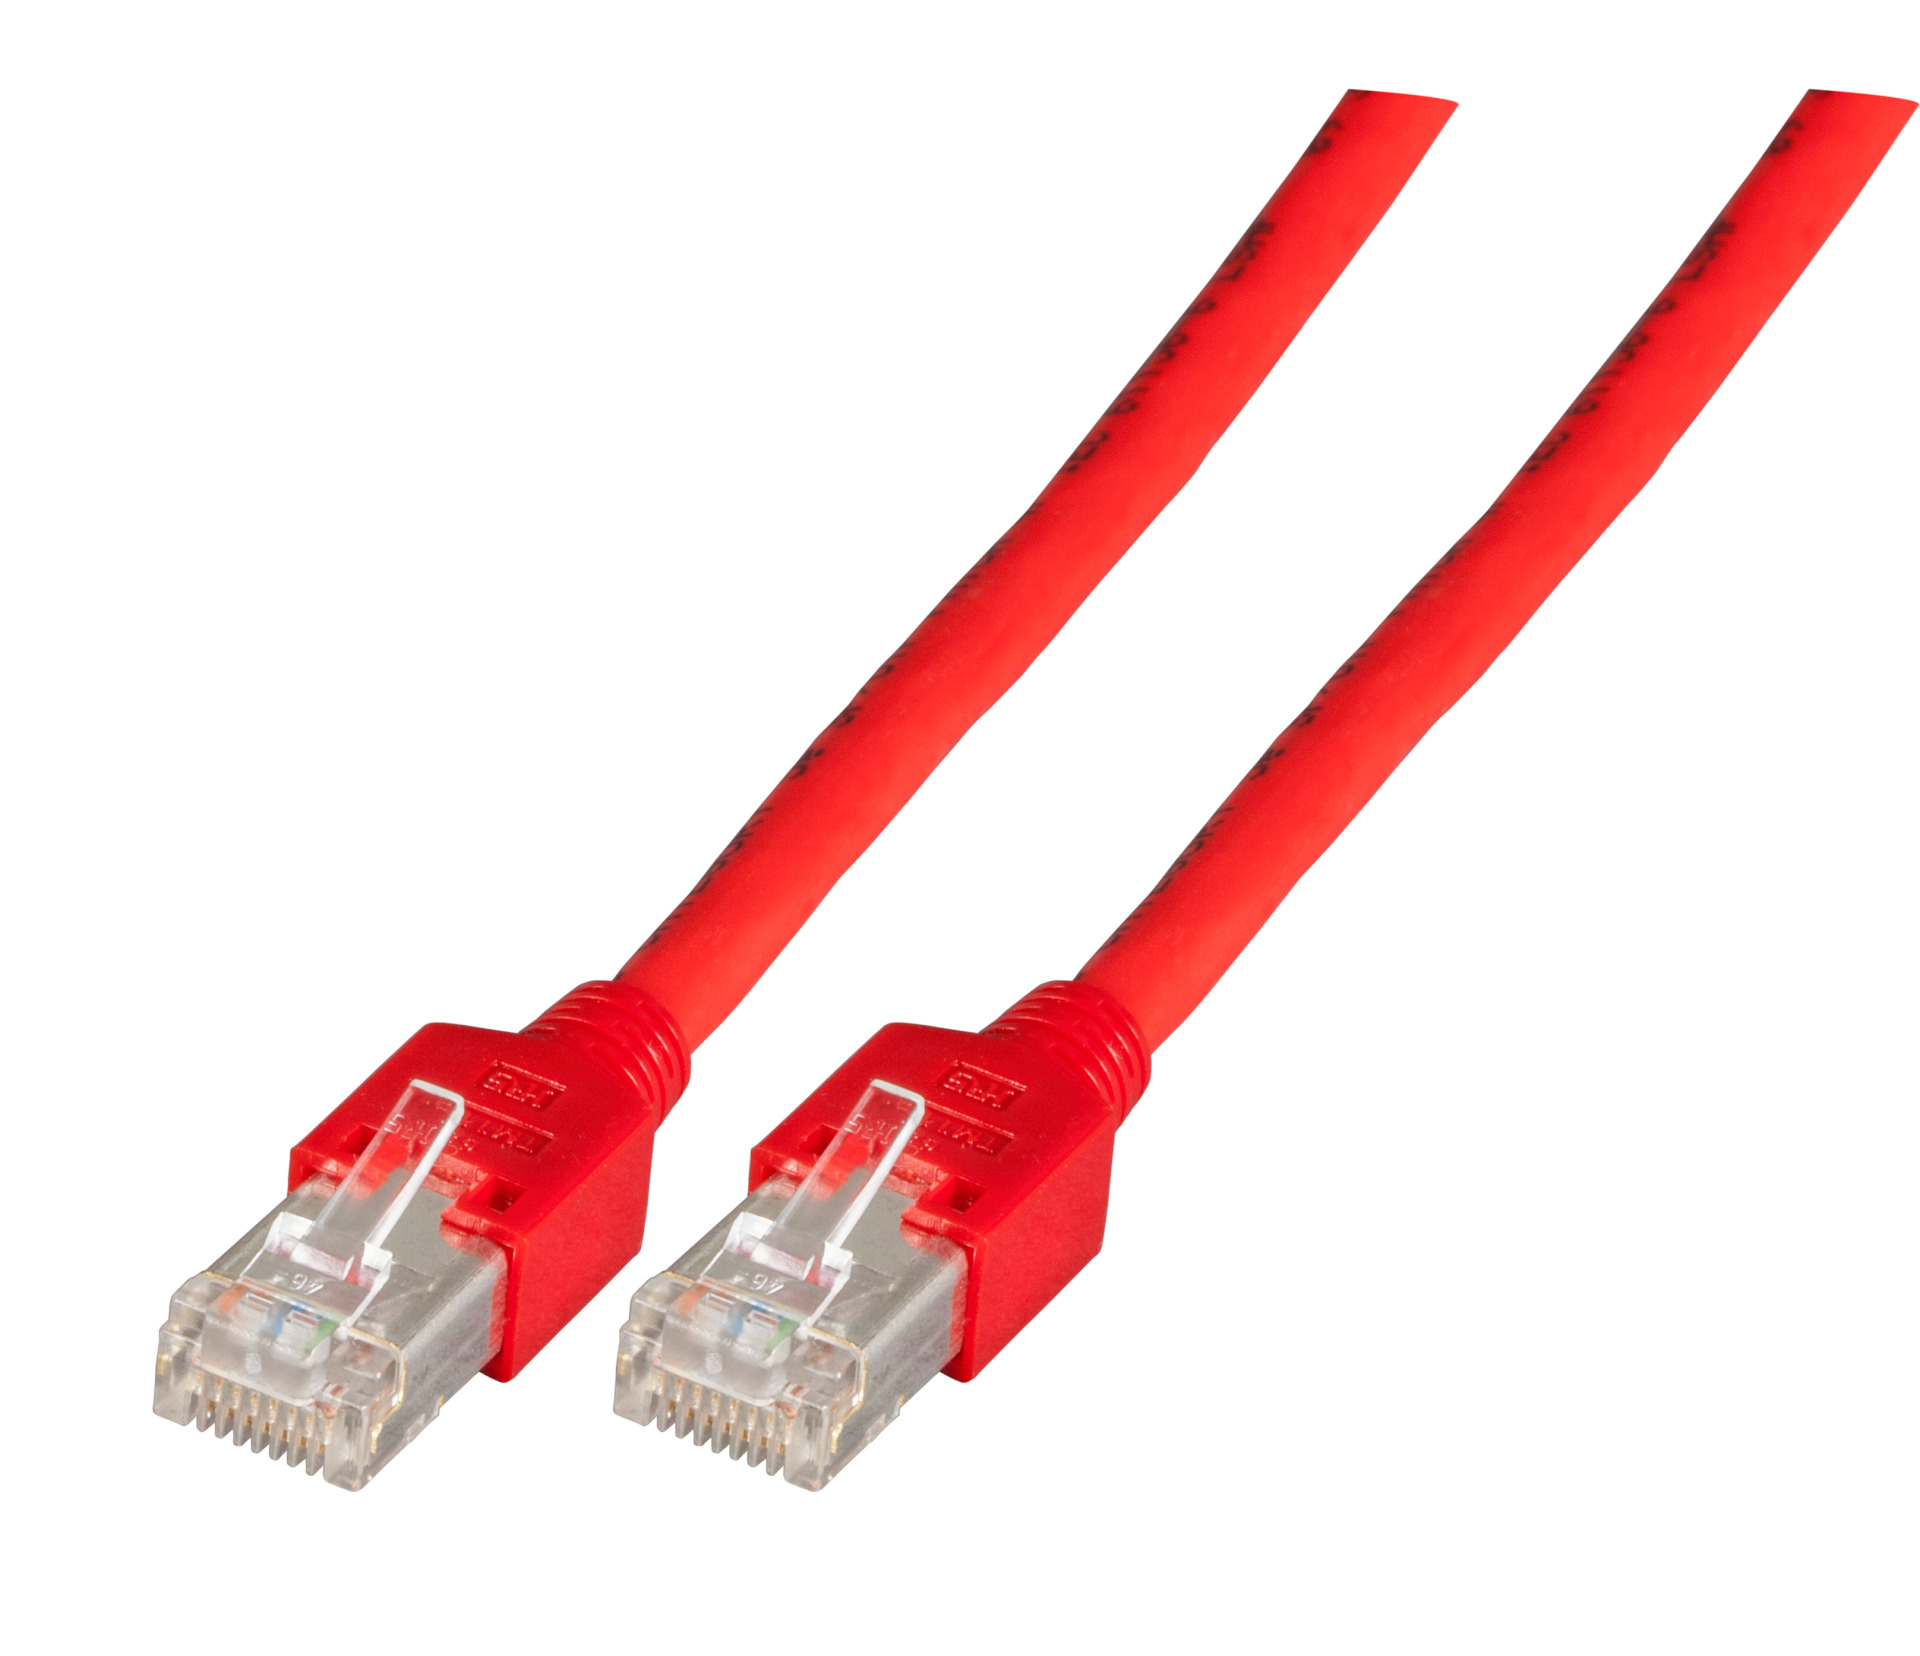 RJ45 Patch cable SF/UTP, , TM11, UC300, 0,5m, red  m ,50